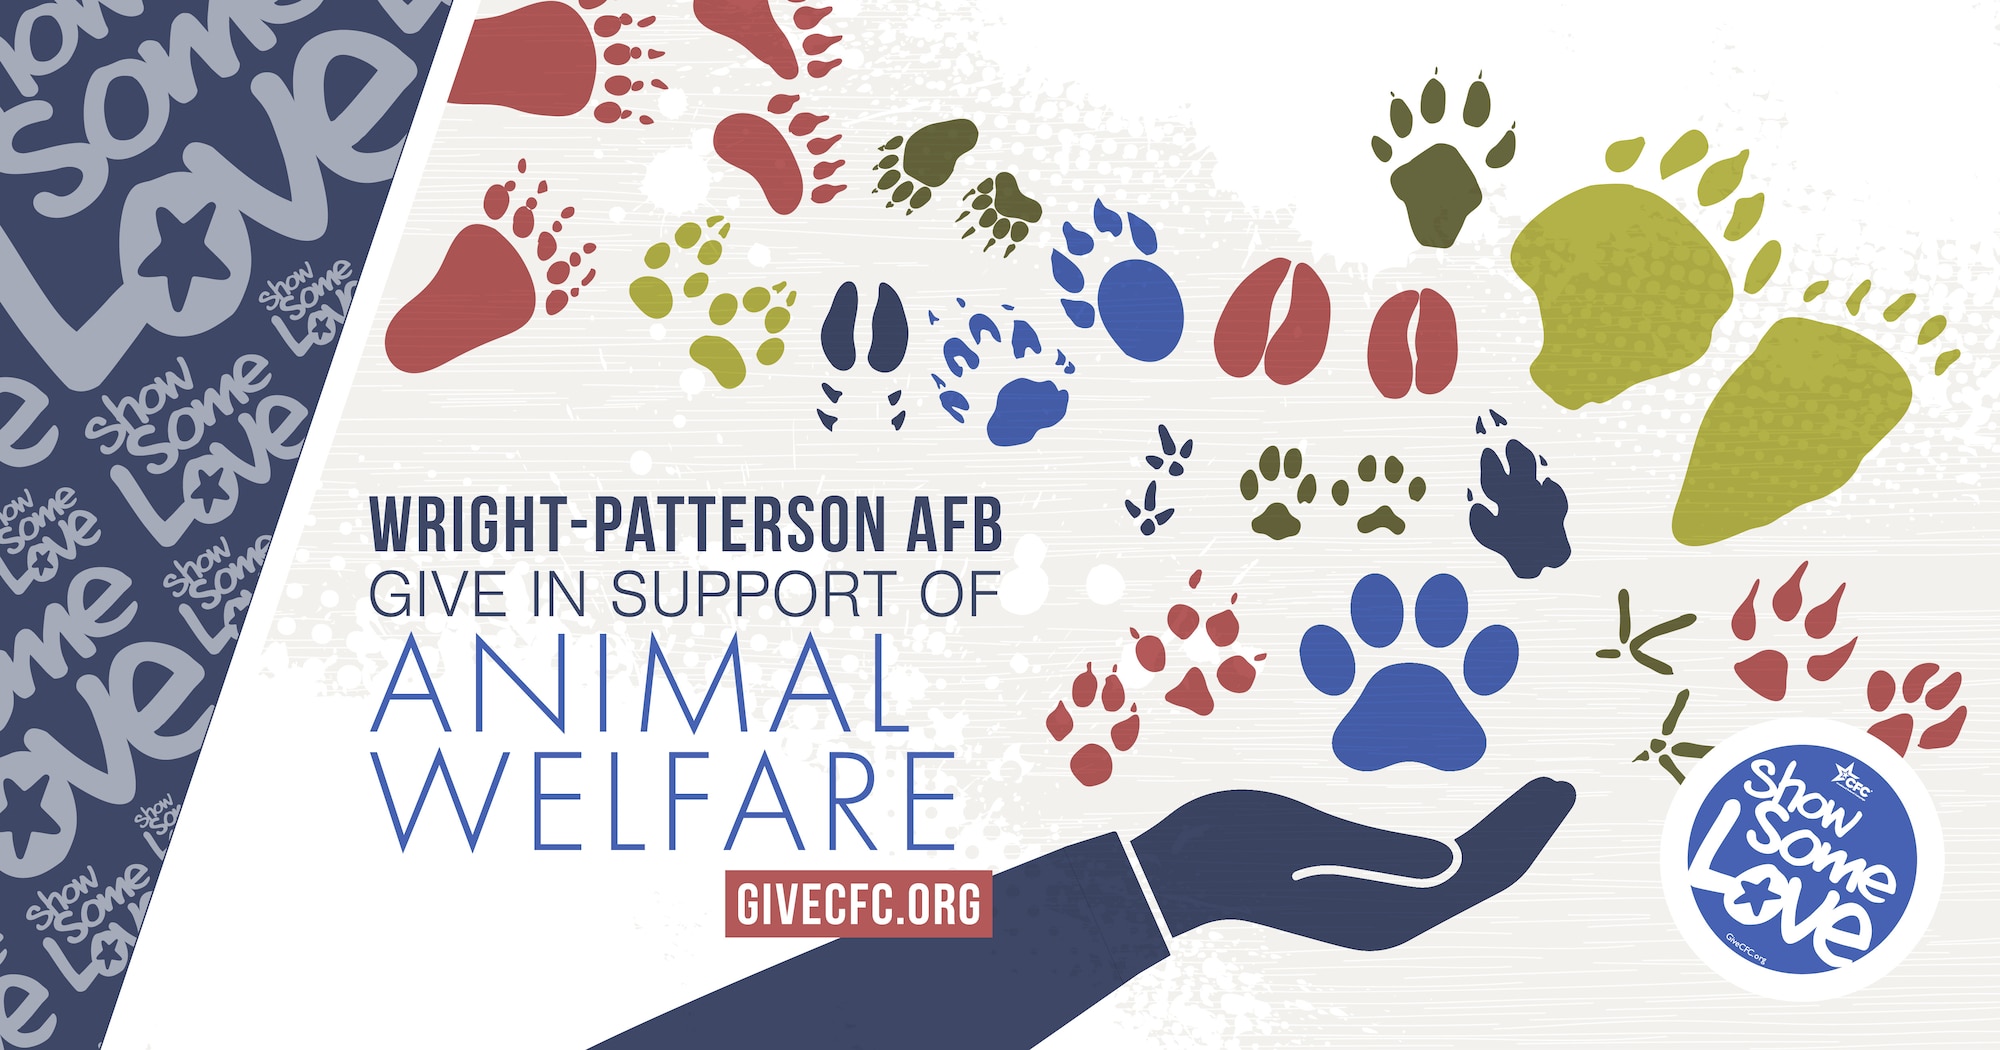 Many CFC charities dedicate their efforts to protecting all creatures, large and small. A CFC contribution will benefit a wide variety of domesticated and wildlife animals. (U.S. Air Force graphic by David Clingerman)